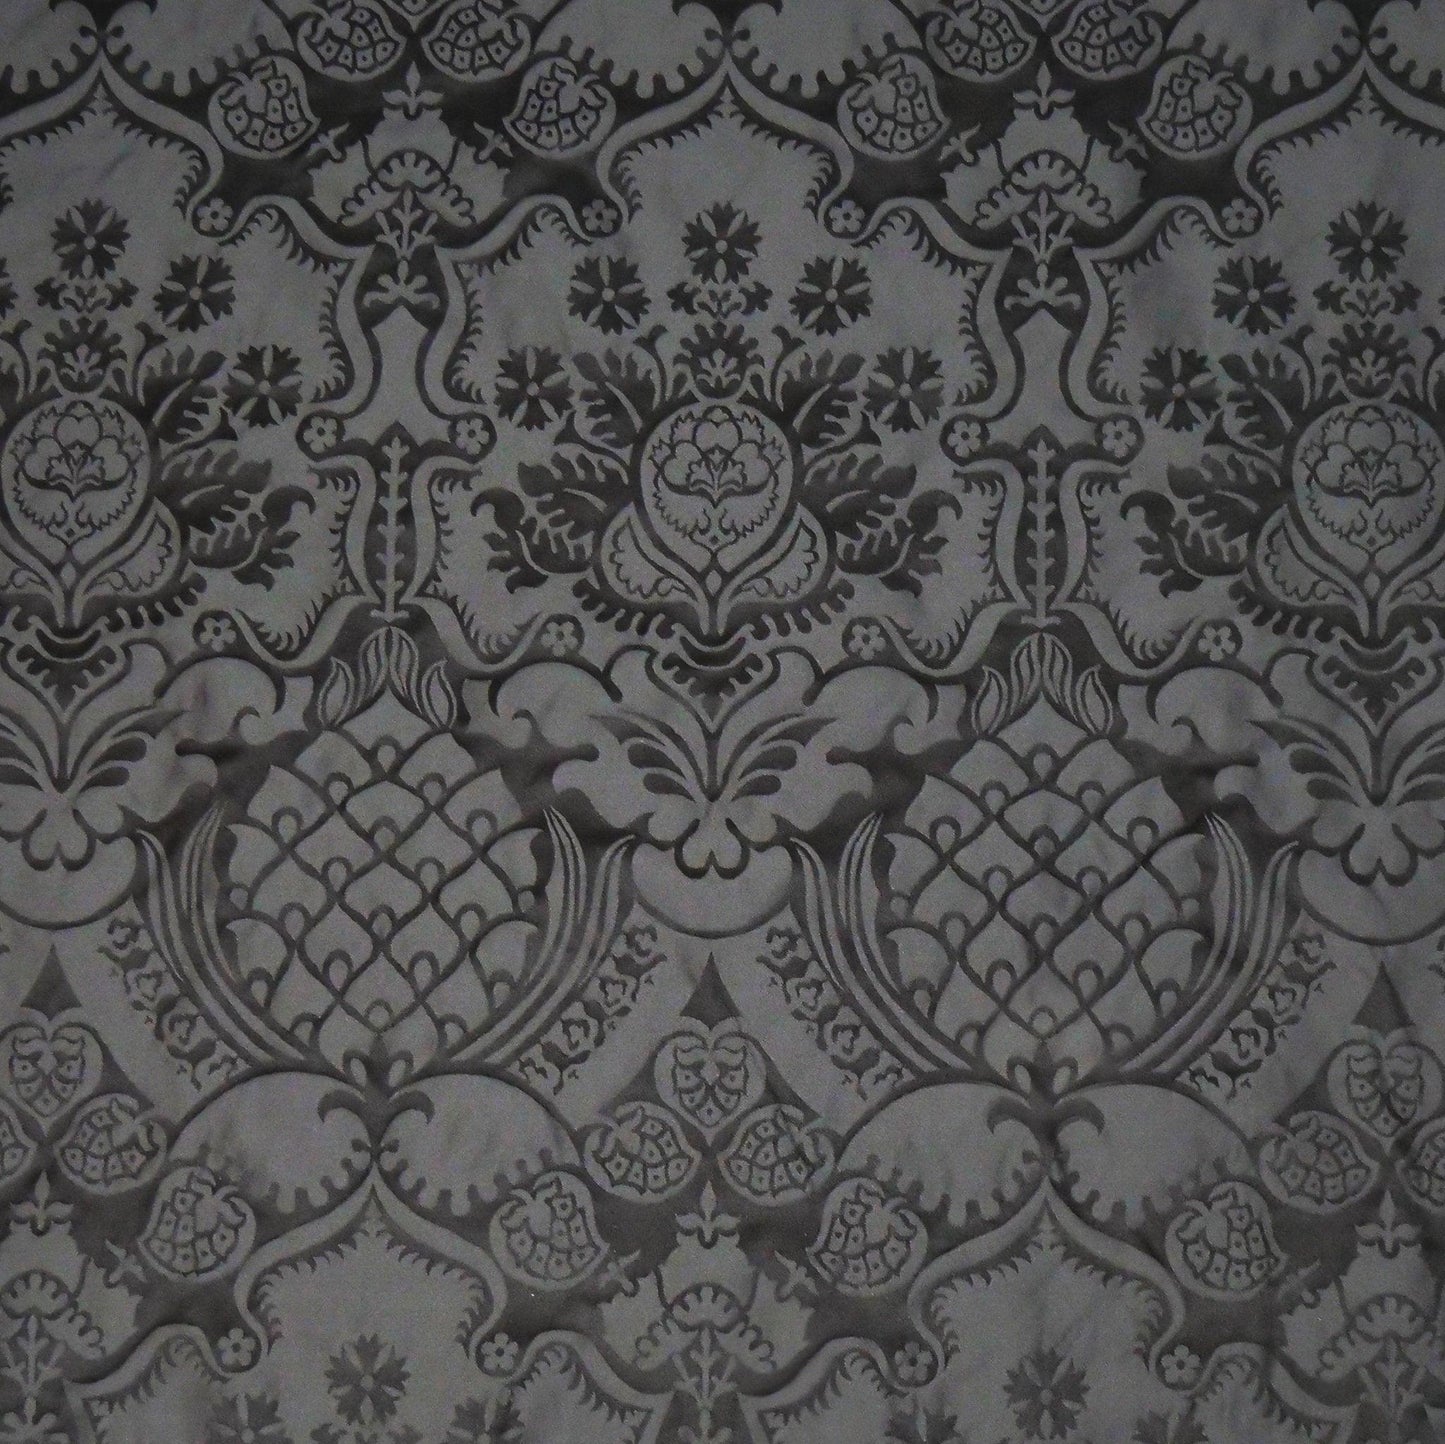 Comper Cathedral Silk Damask - Black - Watts & Co.